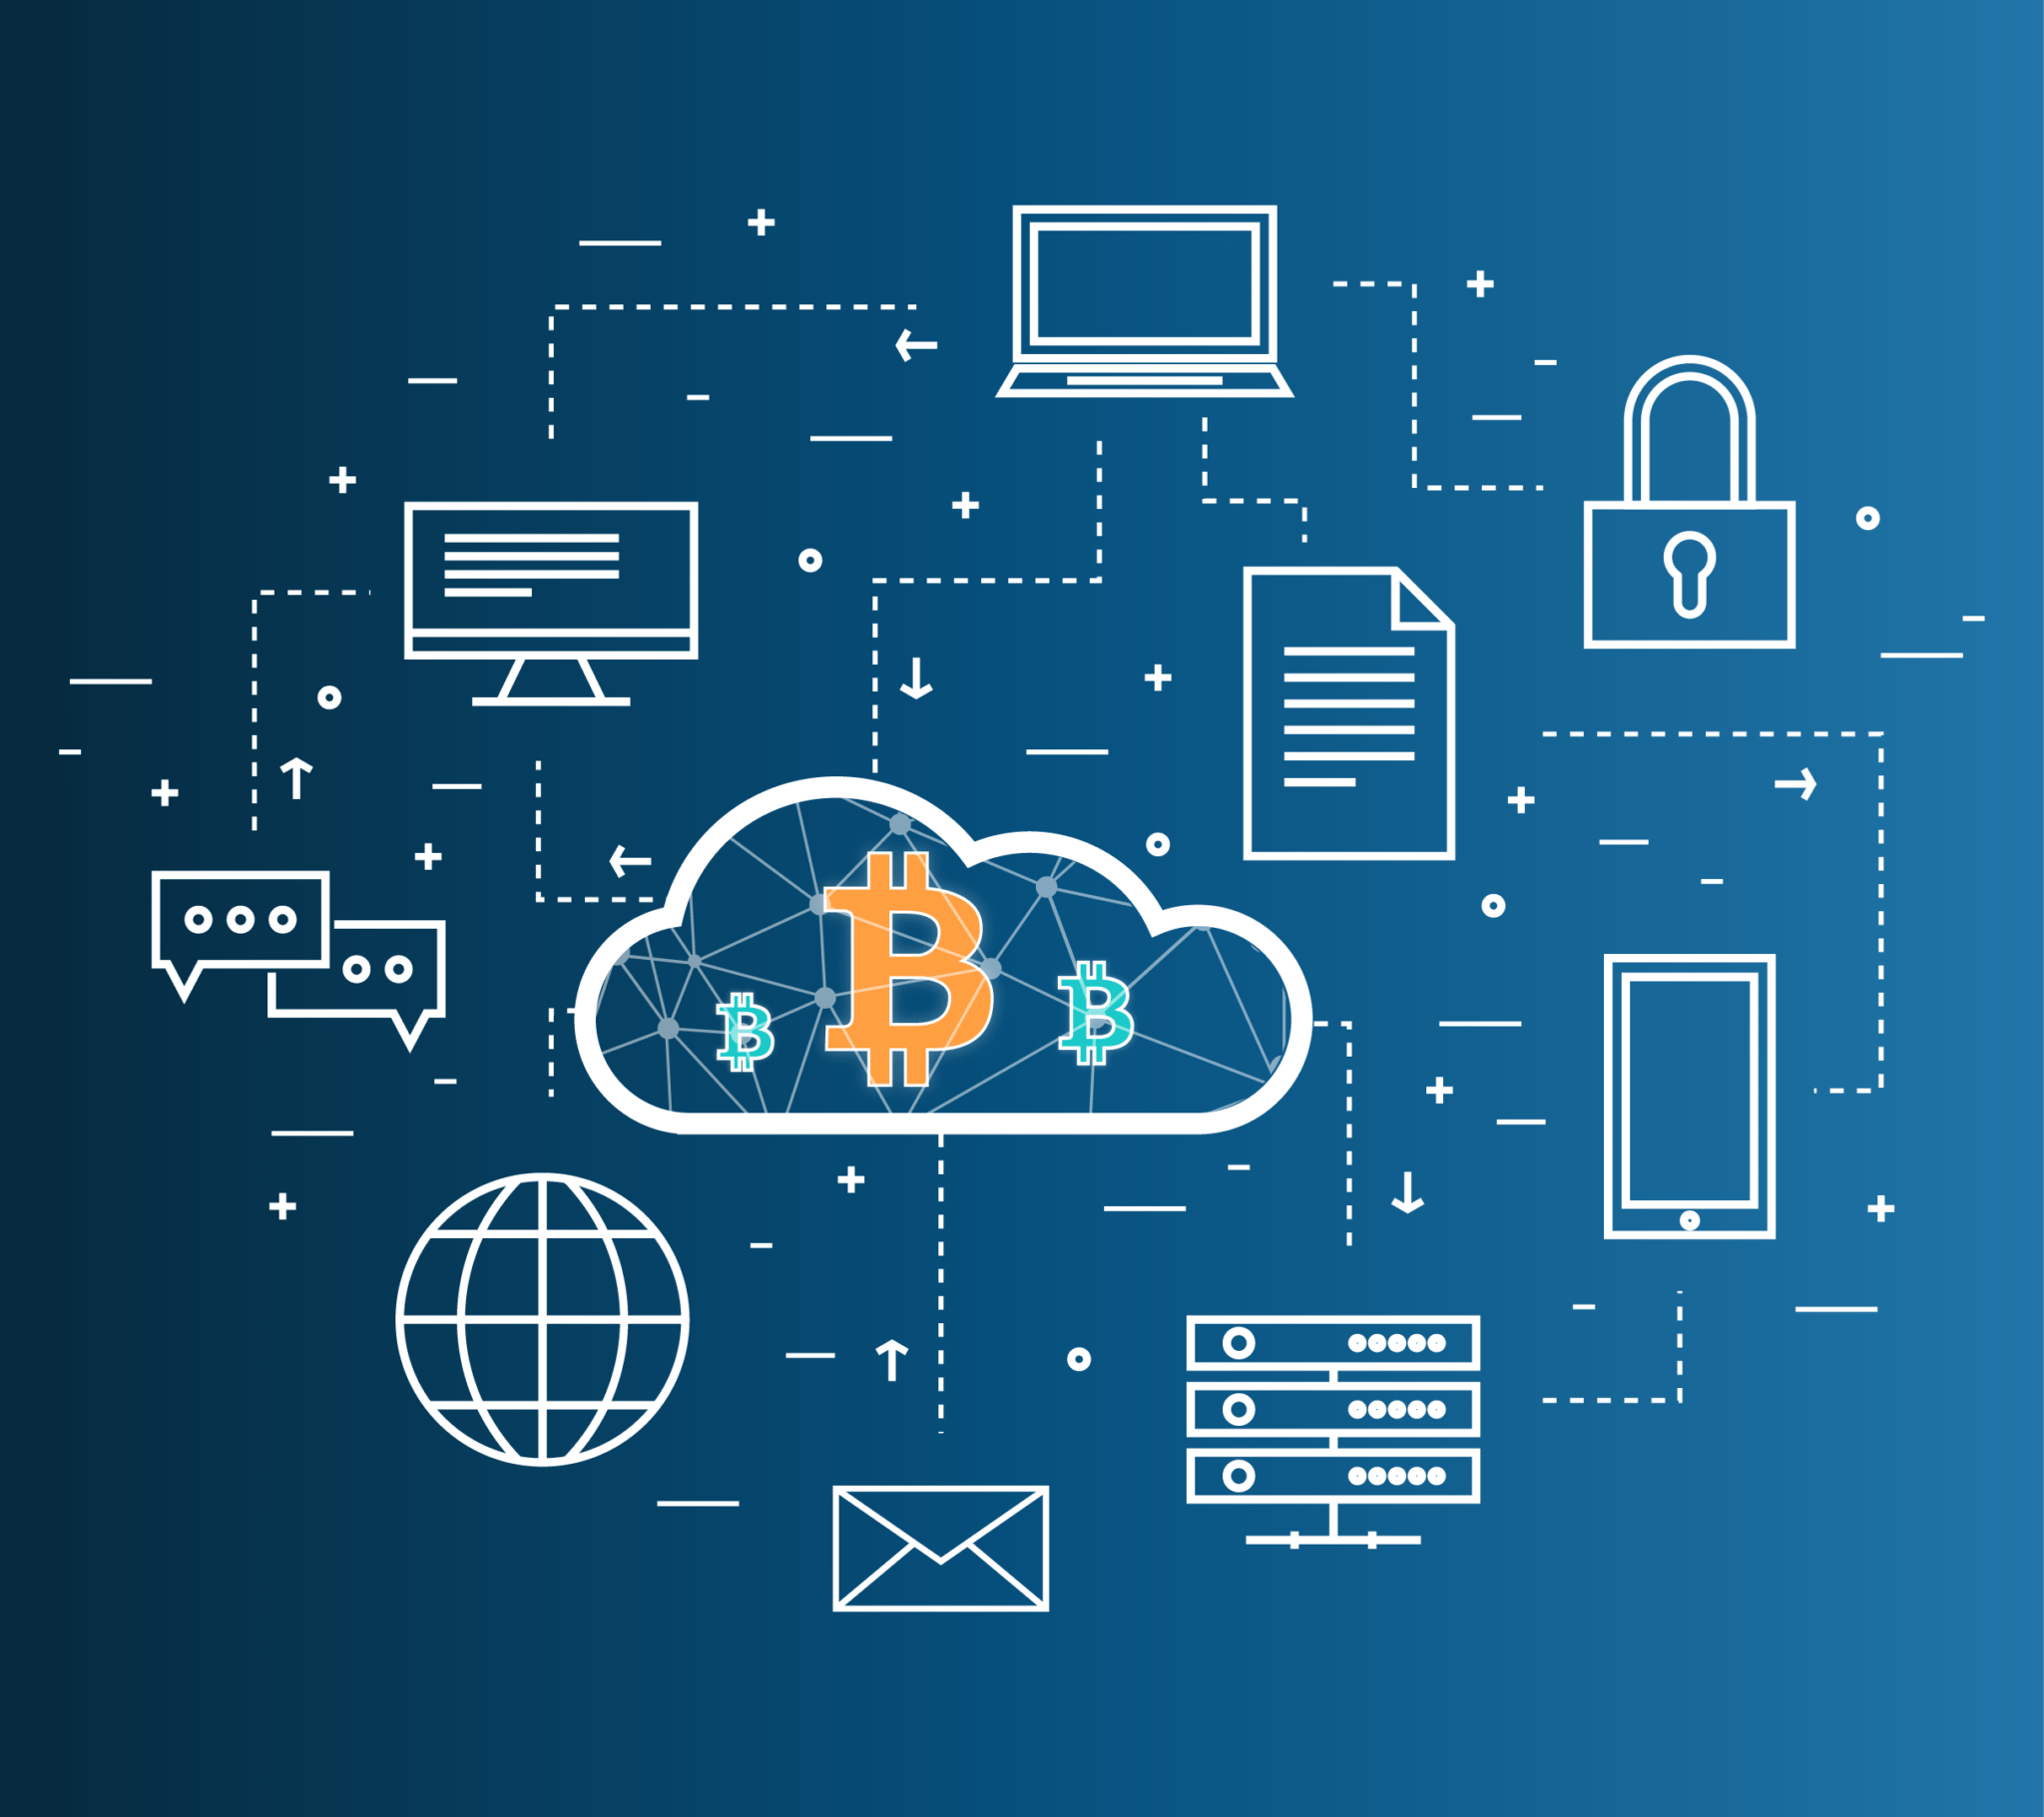 integrate with new age technology-10 reasons to learn blockchain-edureka